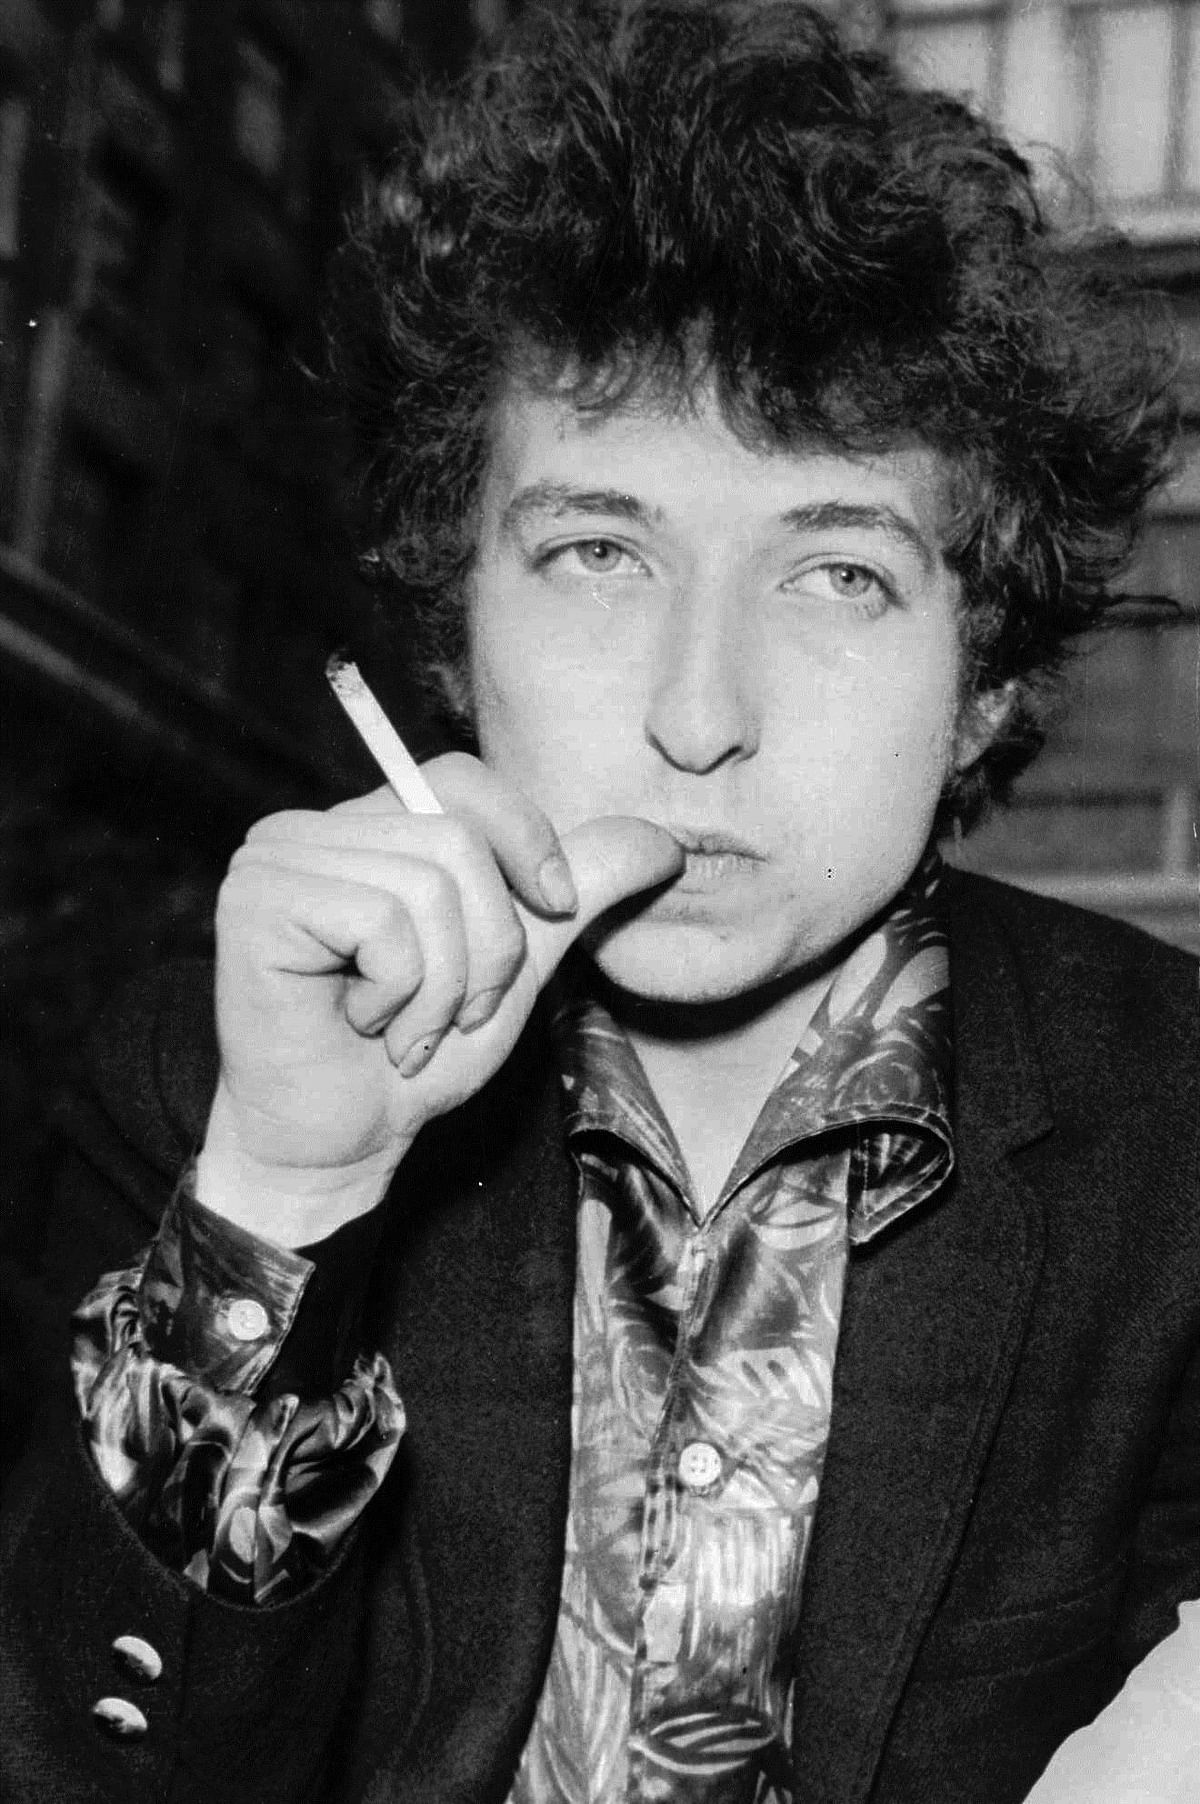 Here are some handy facts about Bob Dylan for conversations post his Nobel Prize win.